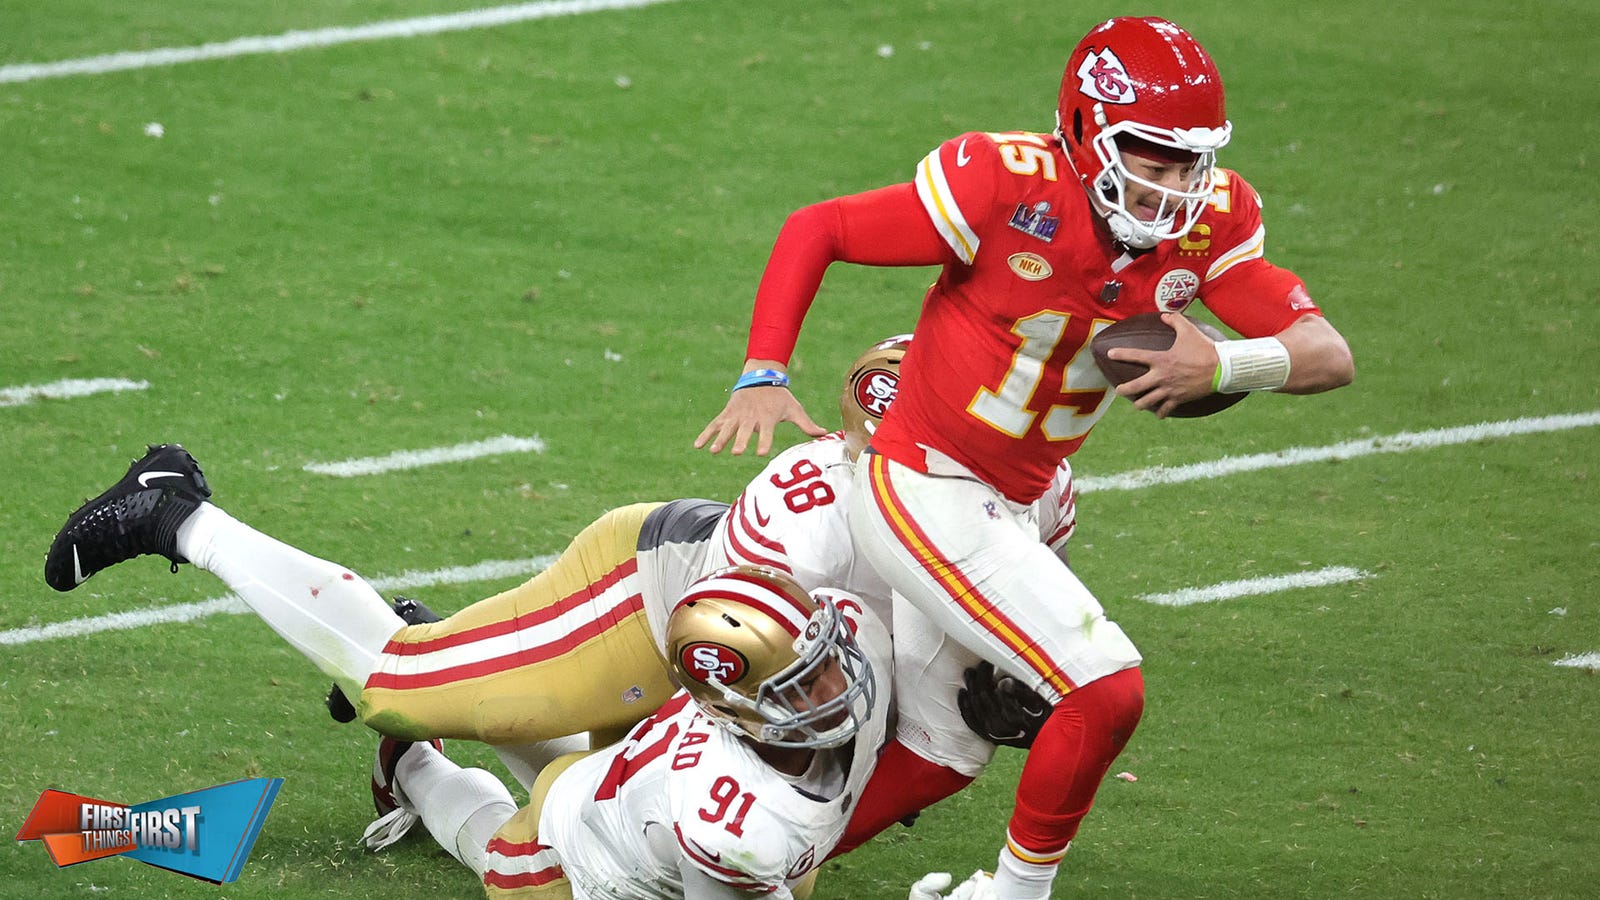 Do Chiefs or 49ers have the better chance to reach Super Bowl LIX?